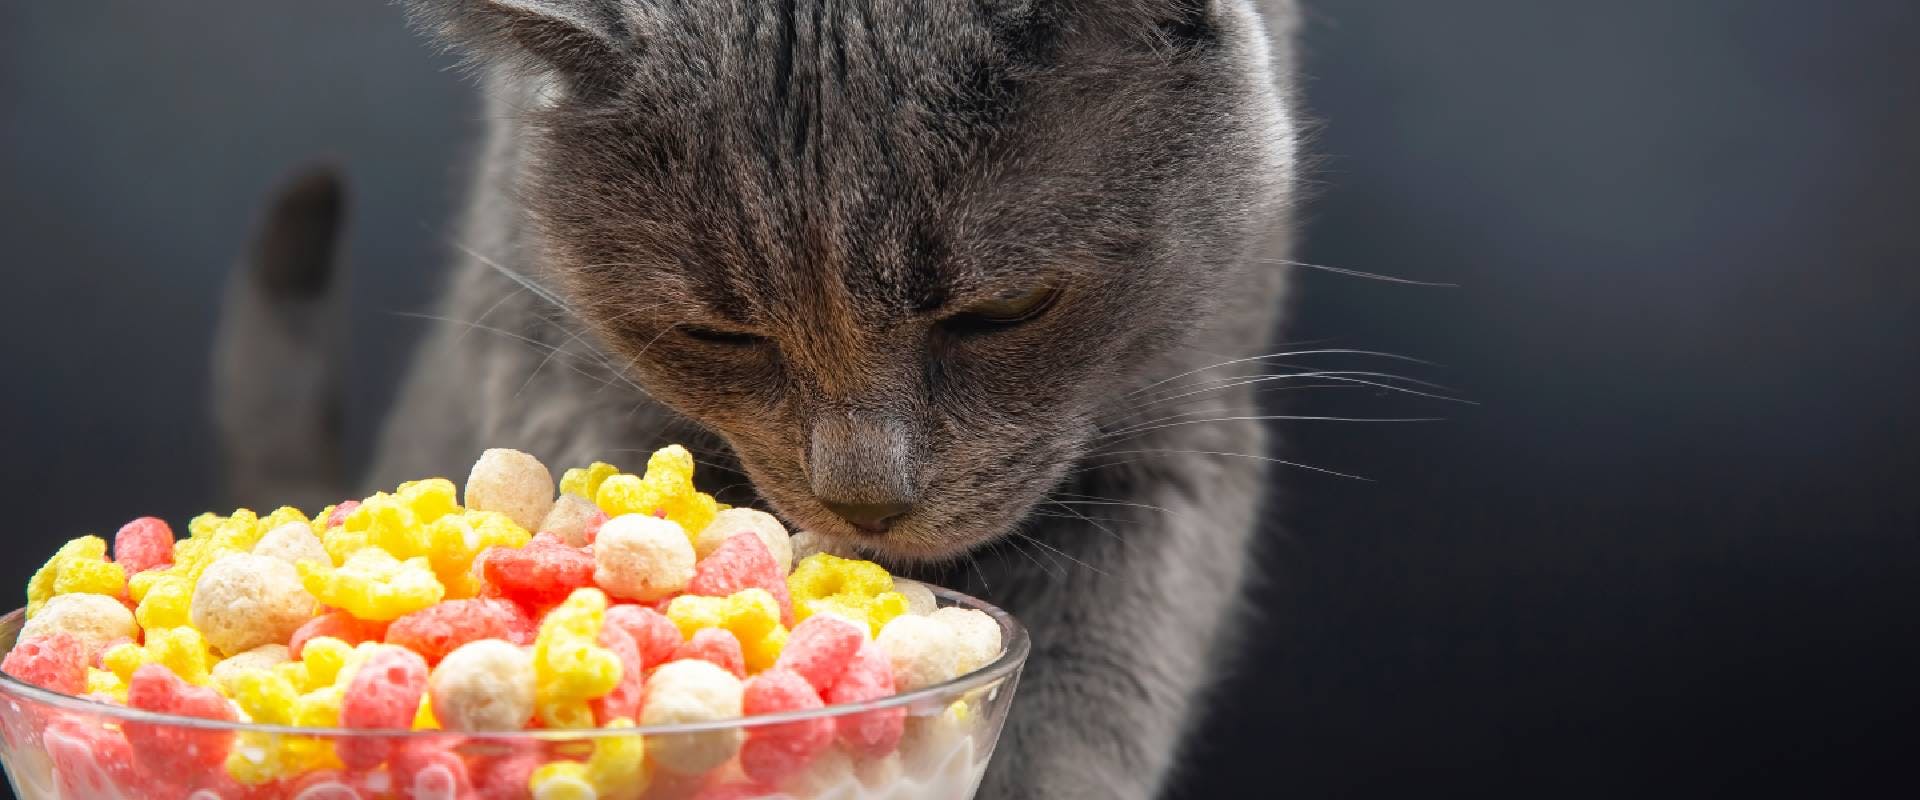 Gray cat sniffing cereal